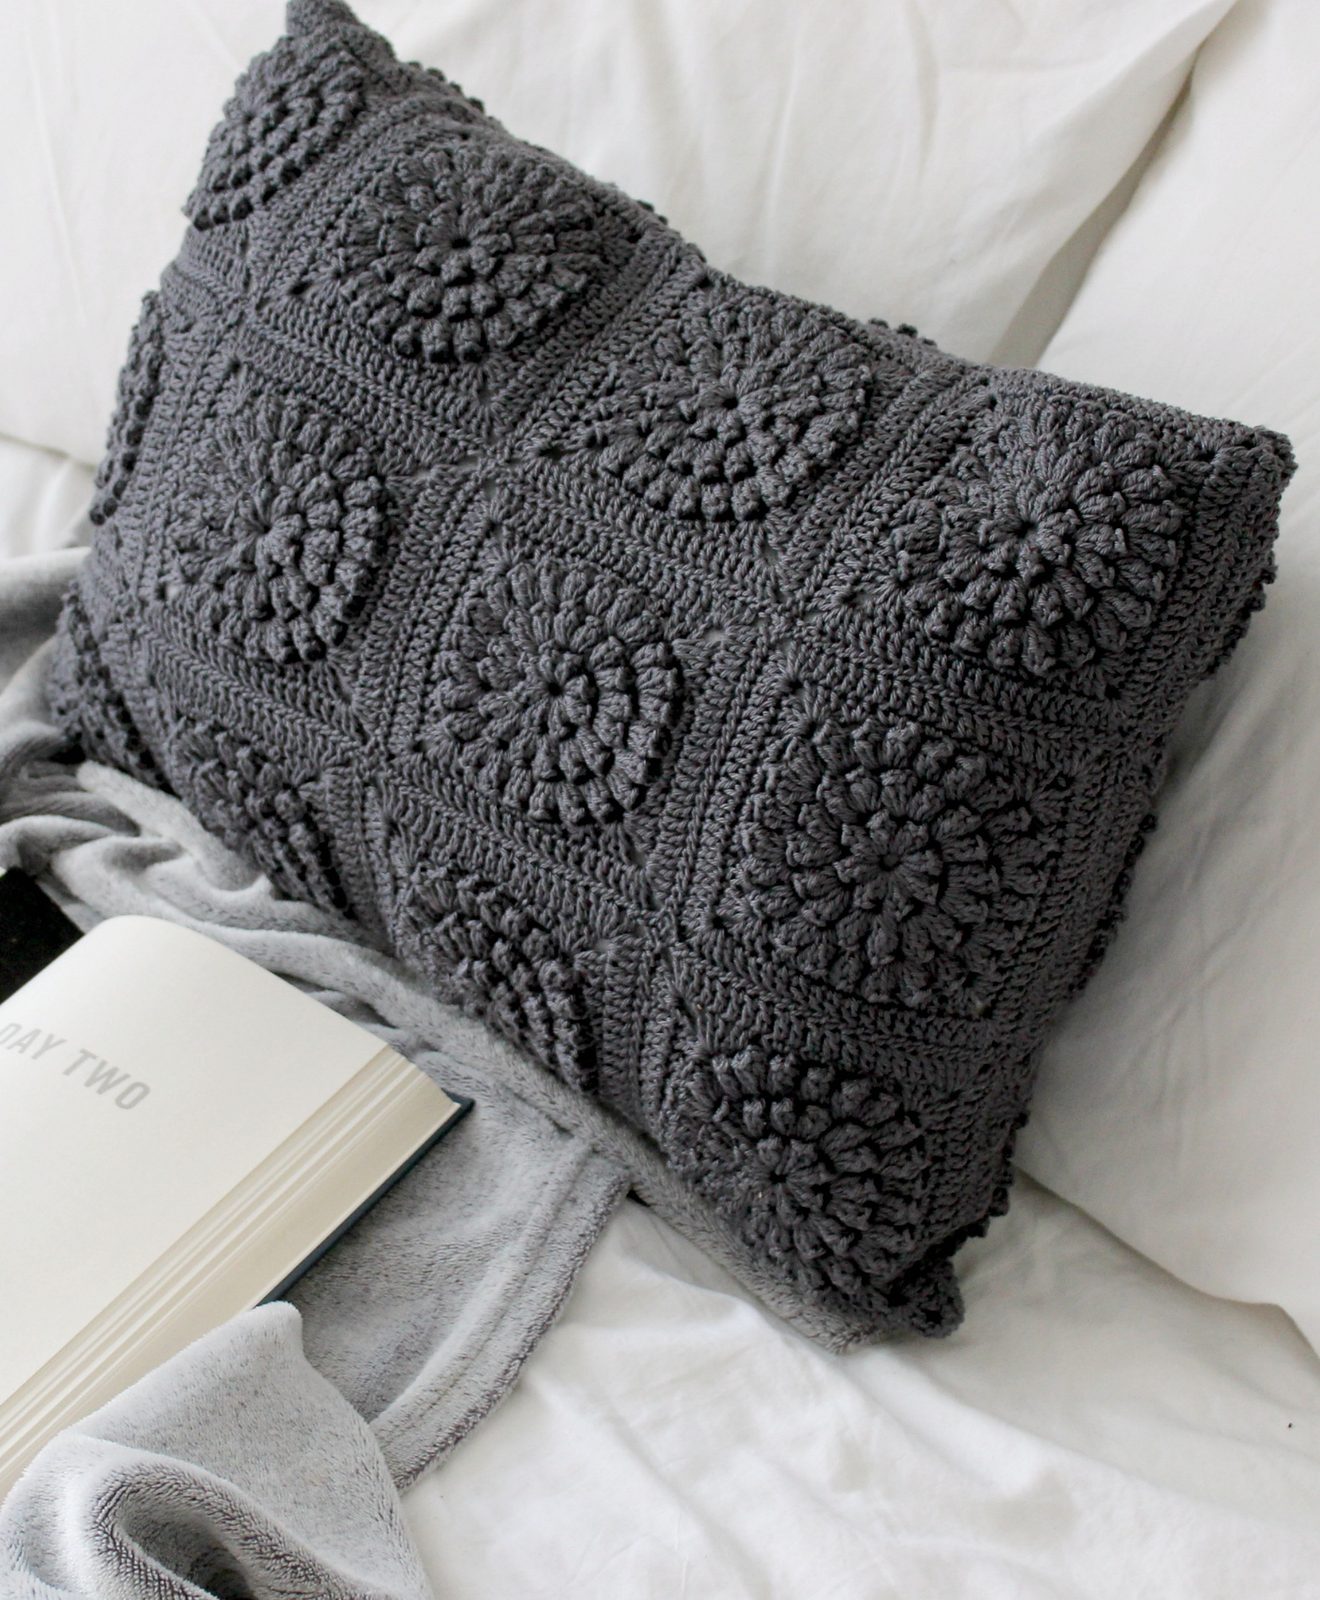 easy-and-beautiful-granny-square-crochet-pillow-pattern-images